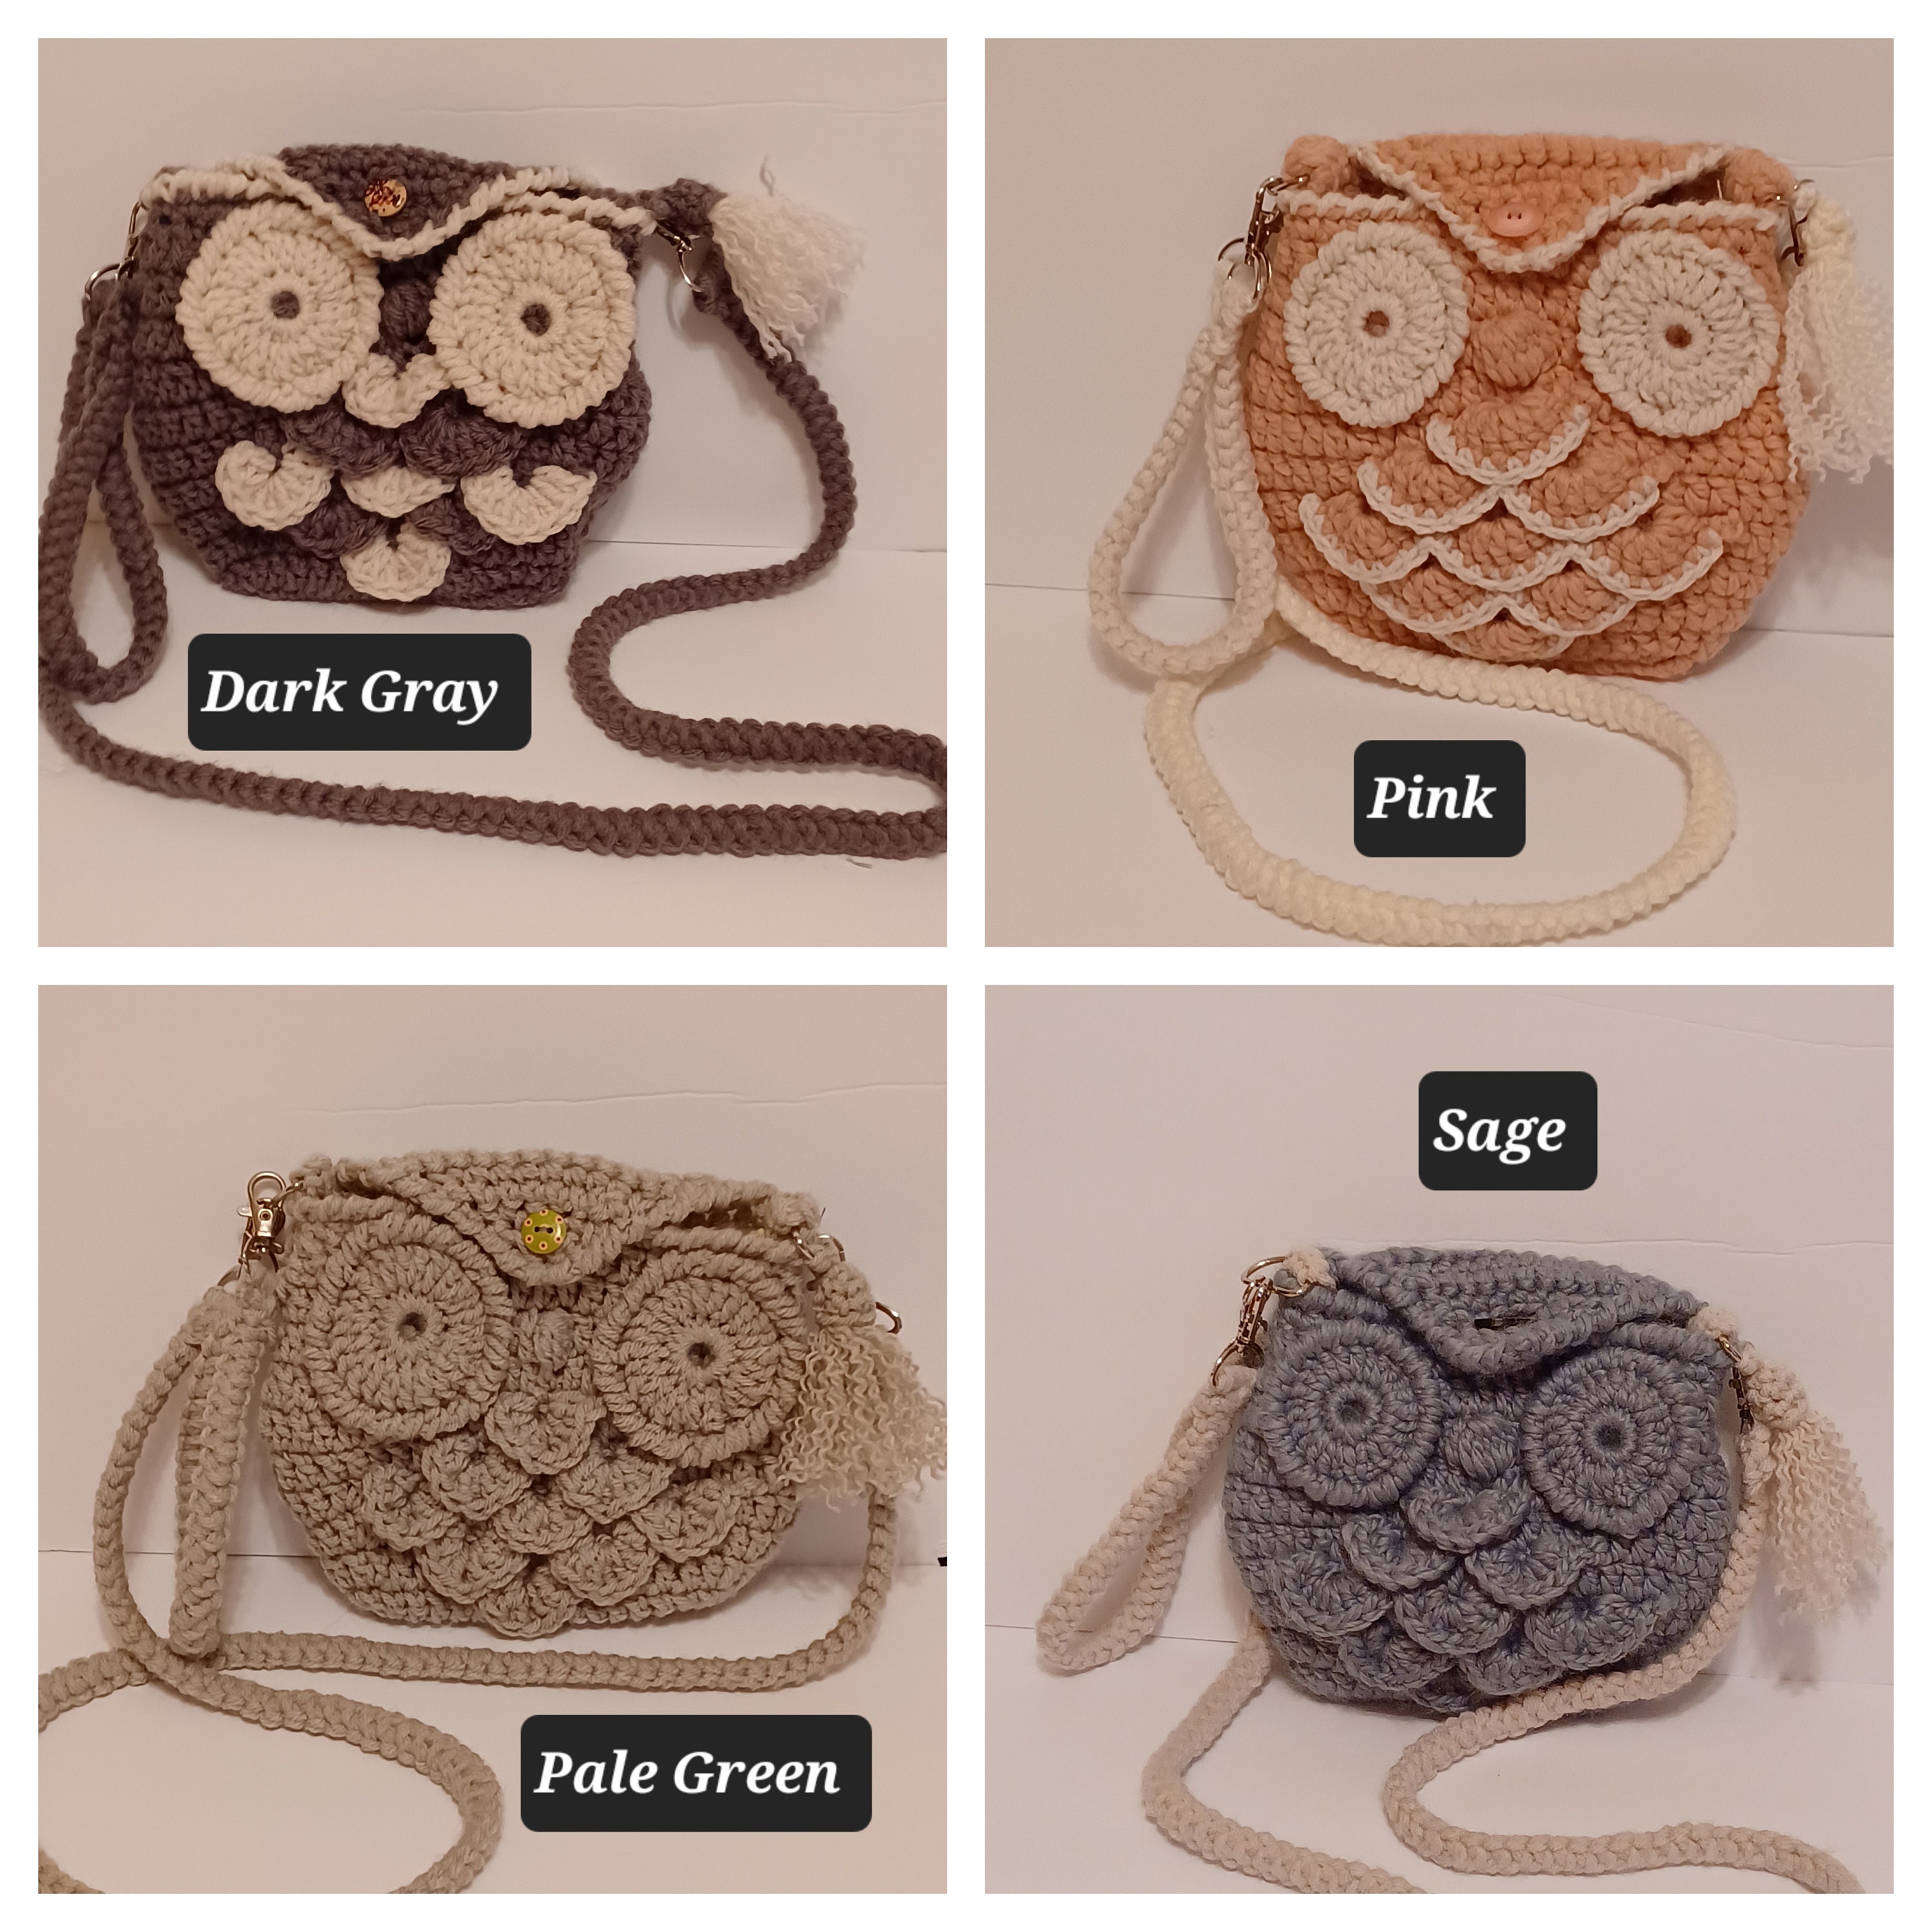 Loungefly Owl Purse Crossbody Embroidered Owl Bag Circle Eyes Gold Owl Purse